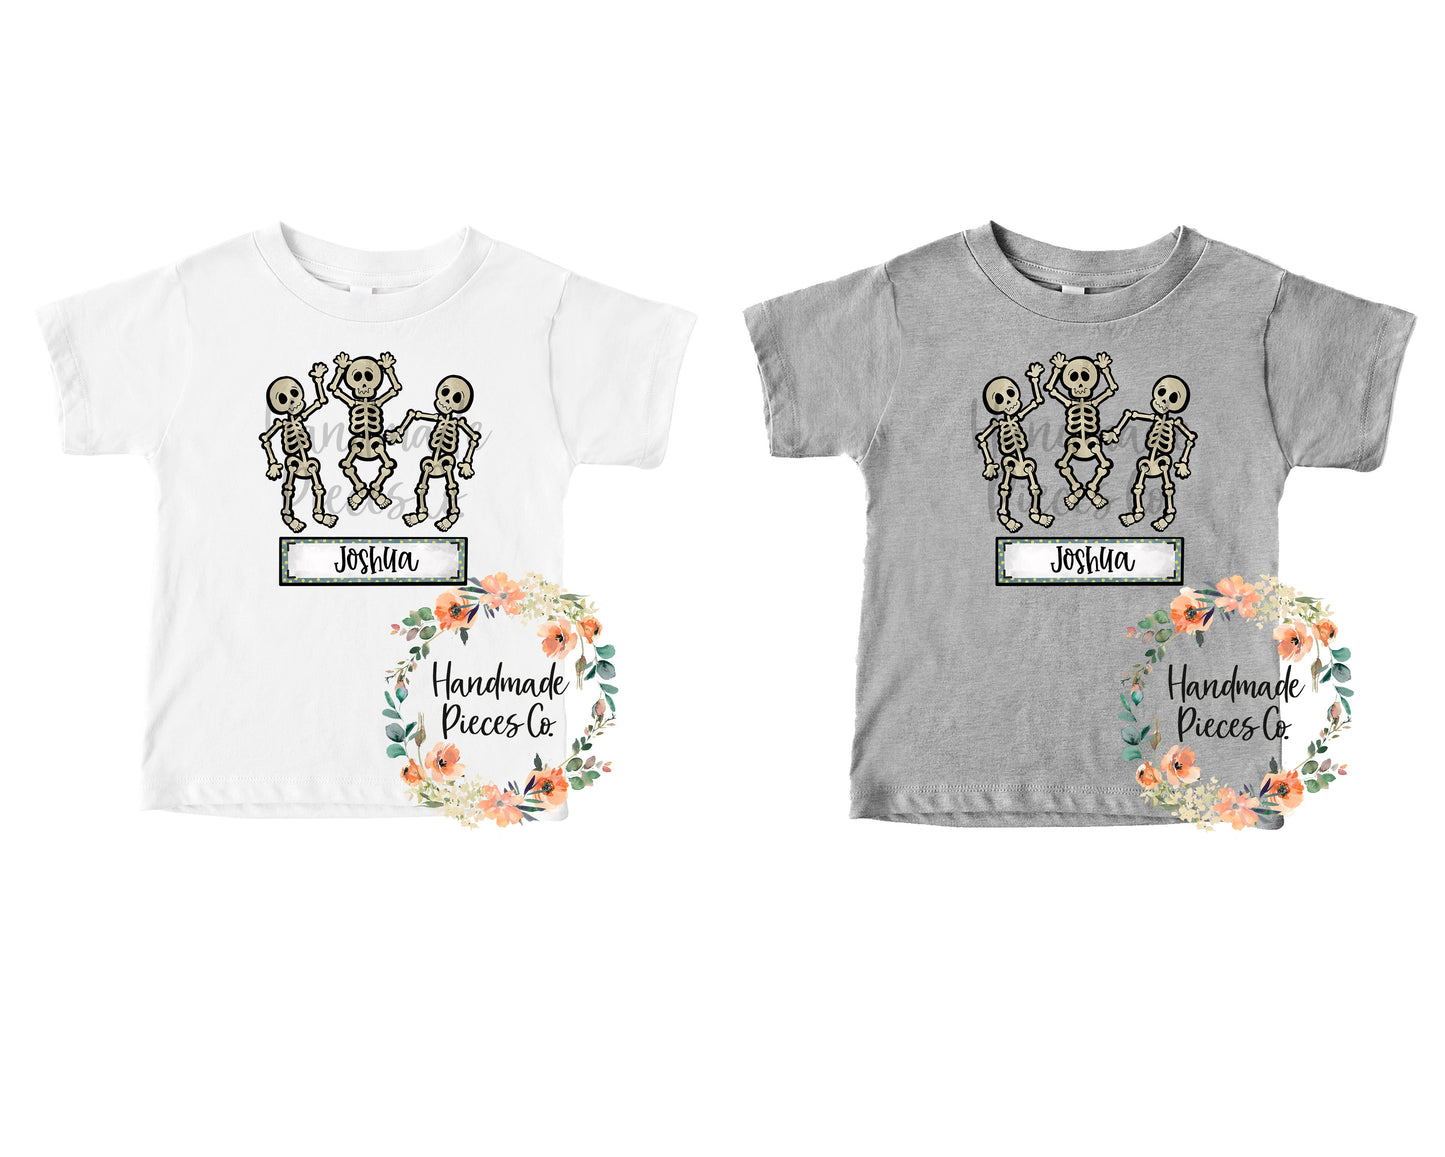 Dancing Skeleton Trio, Gray with Name - Sublimation or HTV Transfer